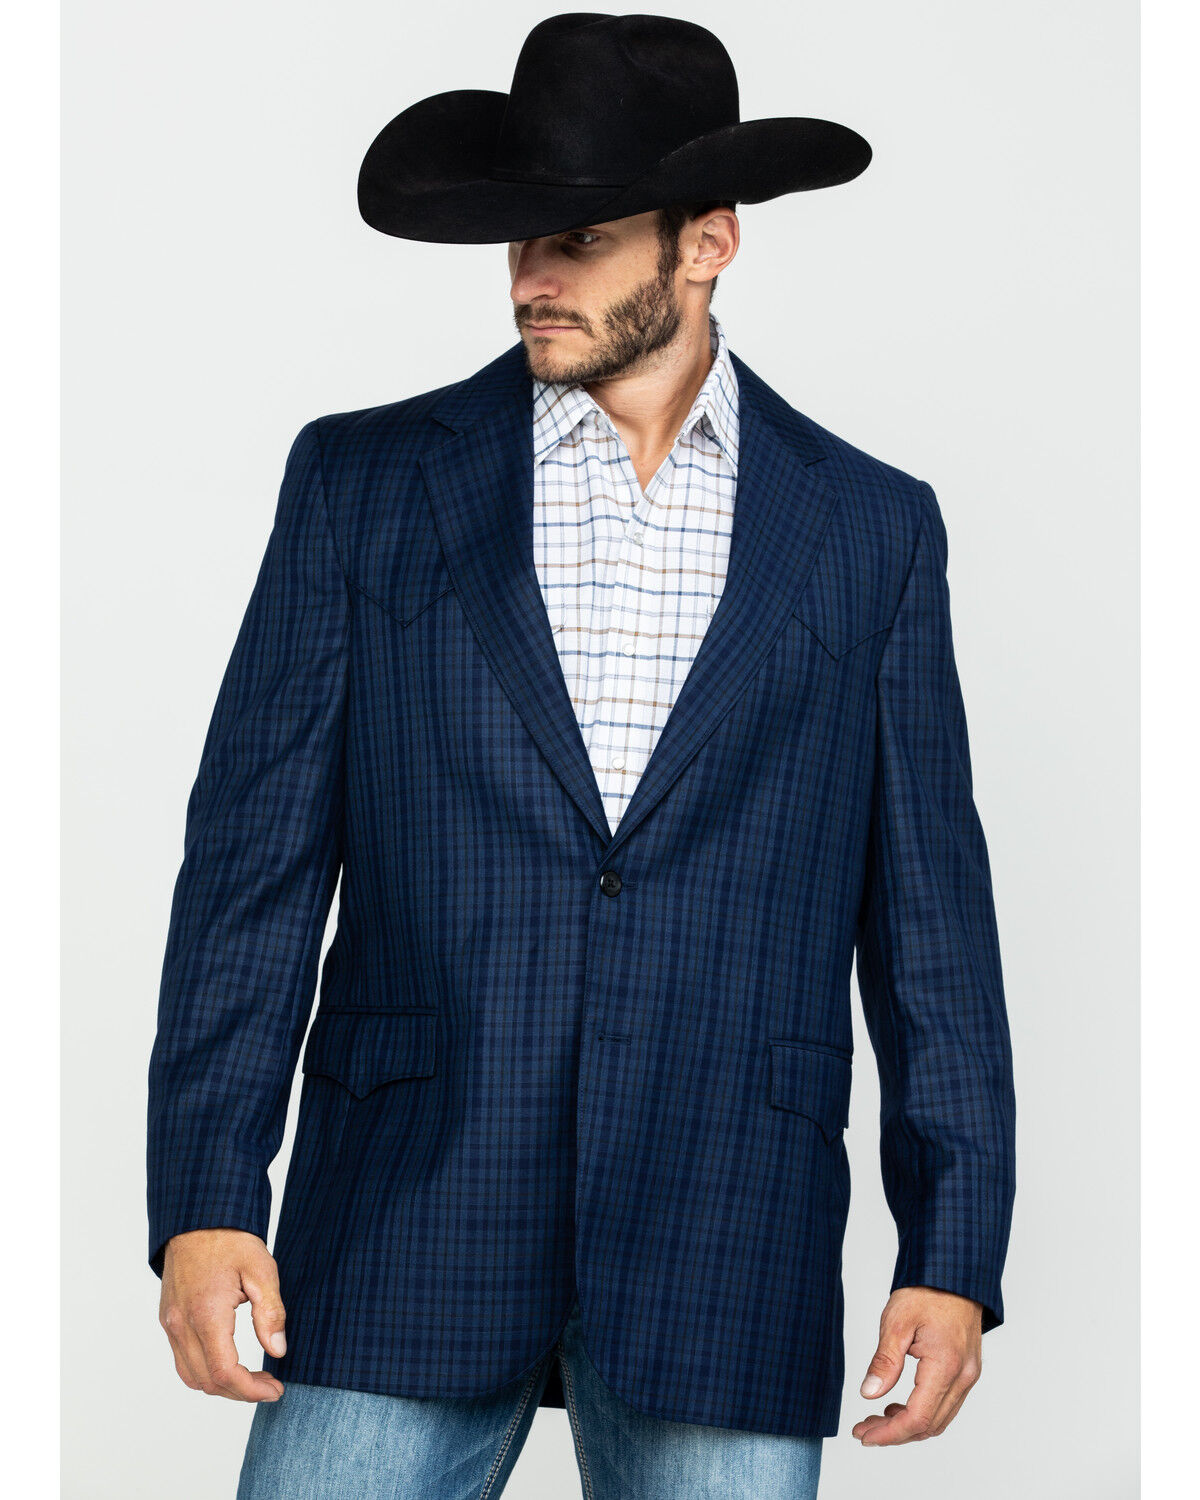 sport coat with jeans and cowboy boots